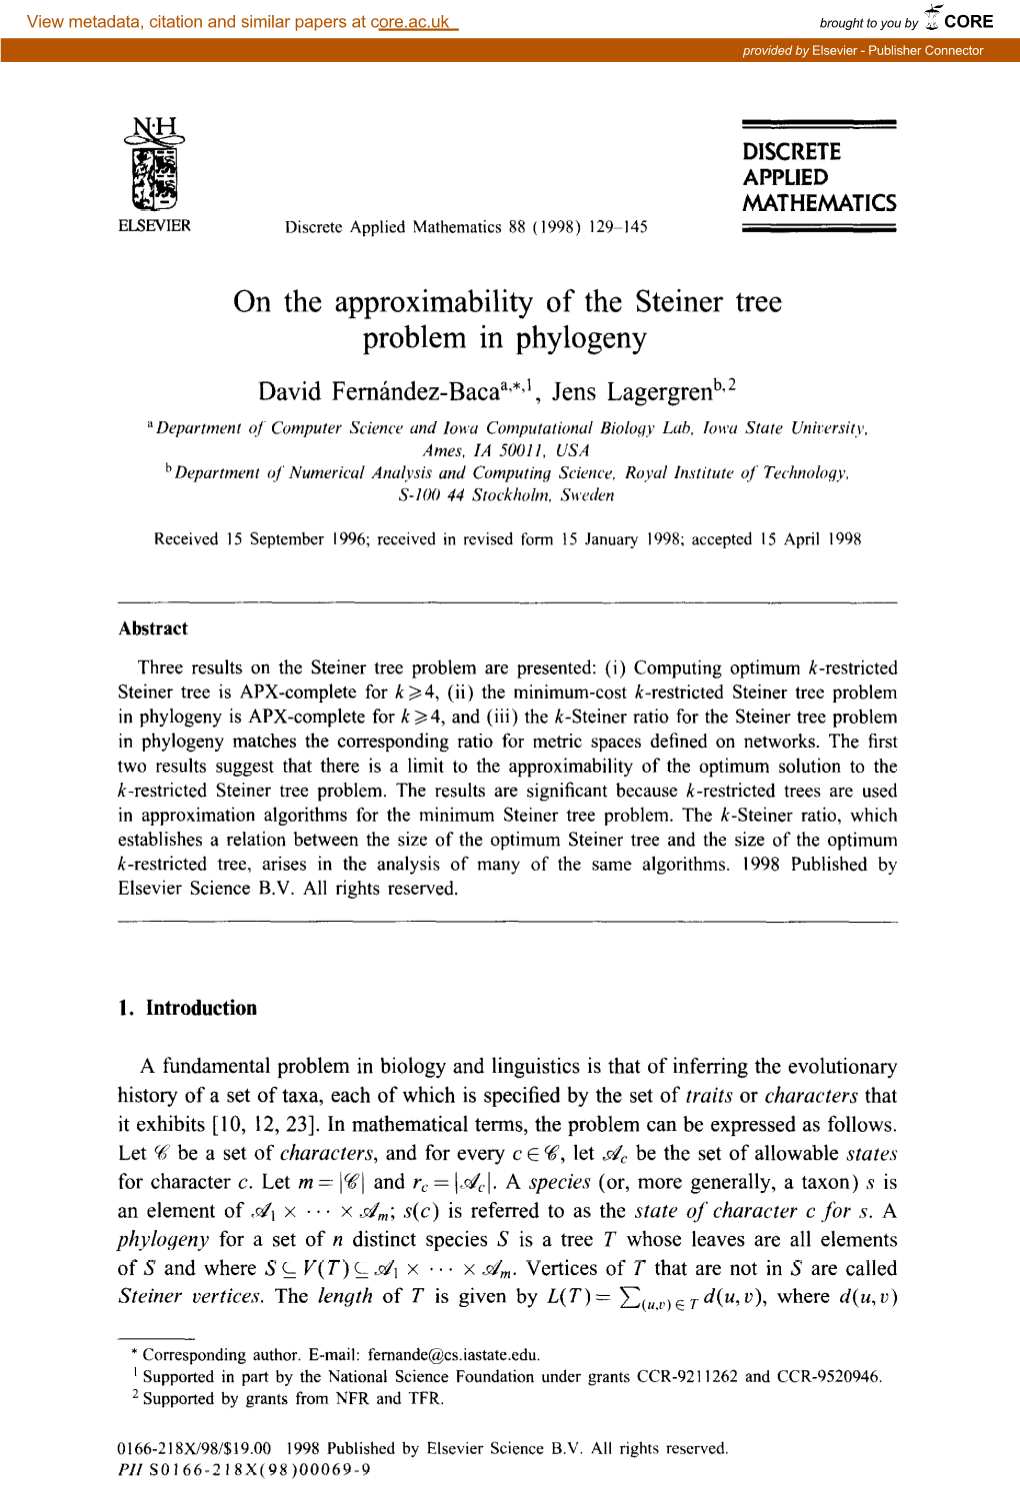 On the Approximability of the Steiner Tree Problem in Phylogeny